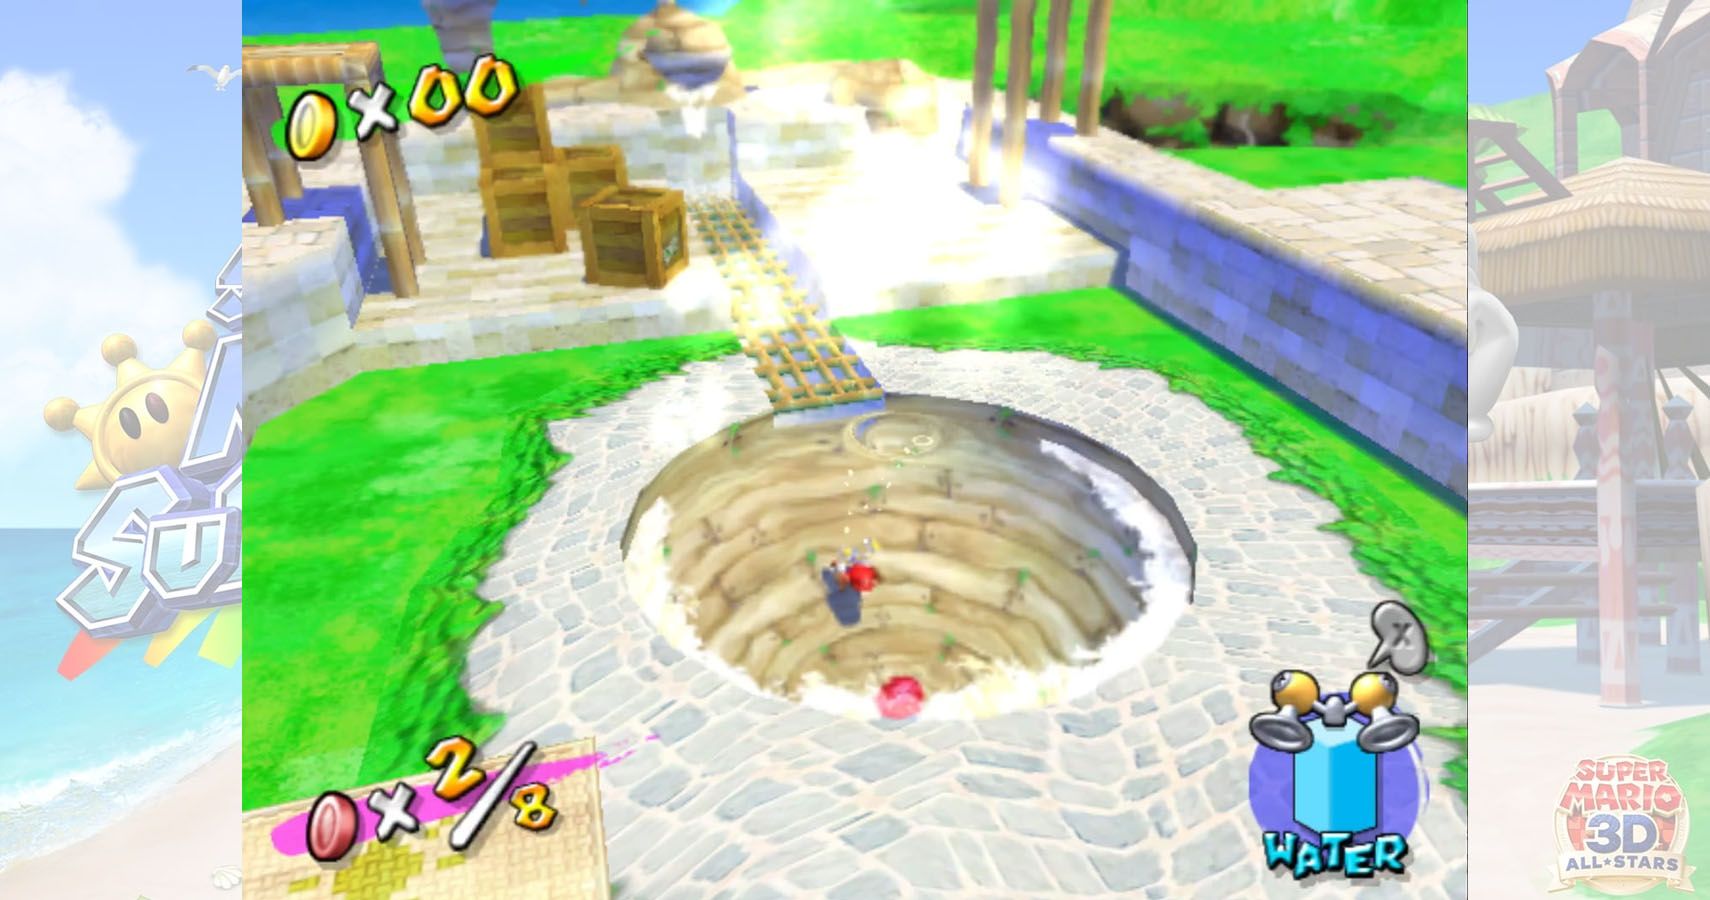 Mario in the water pool in fluffl festival coin hunt level of super mario sunshine.